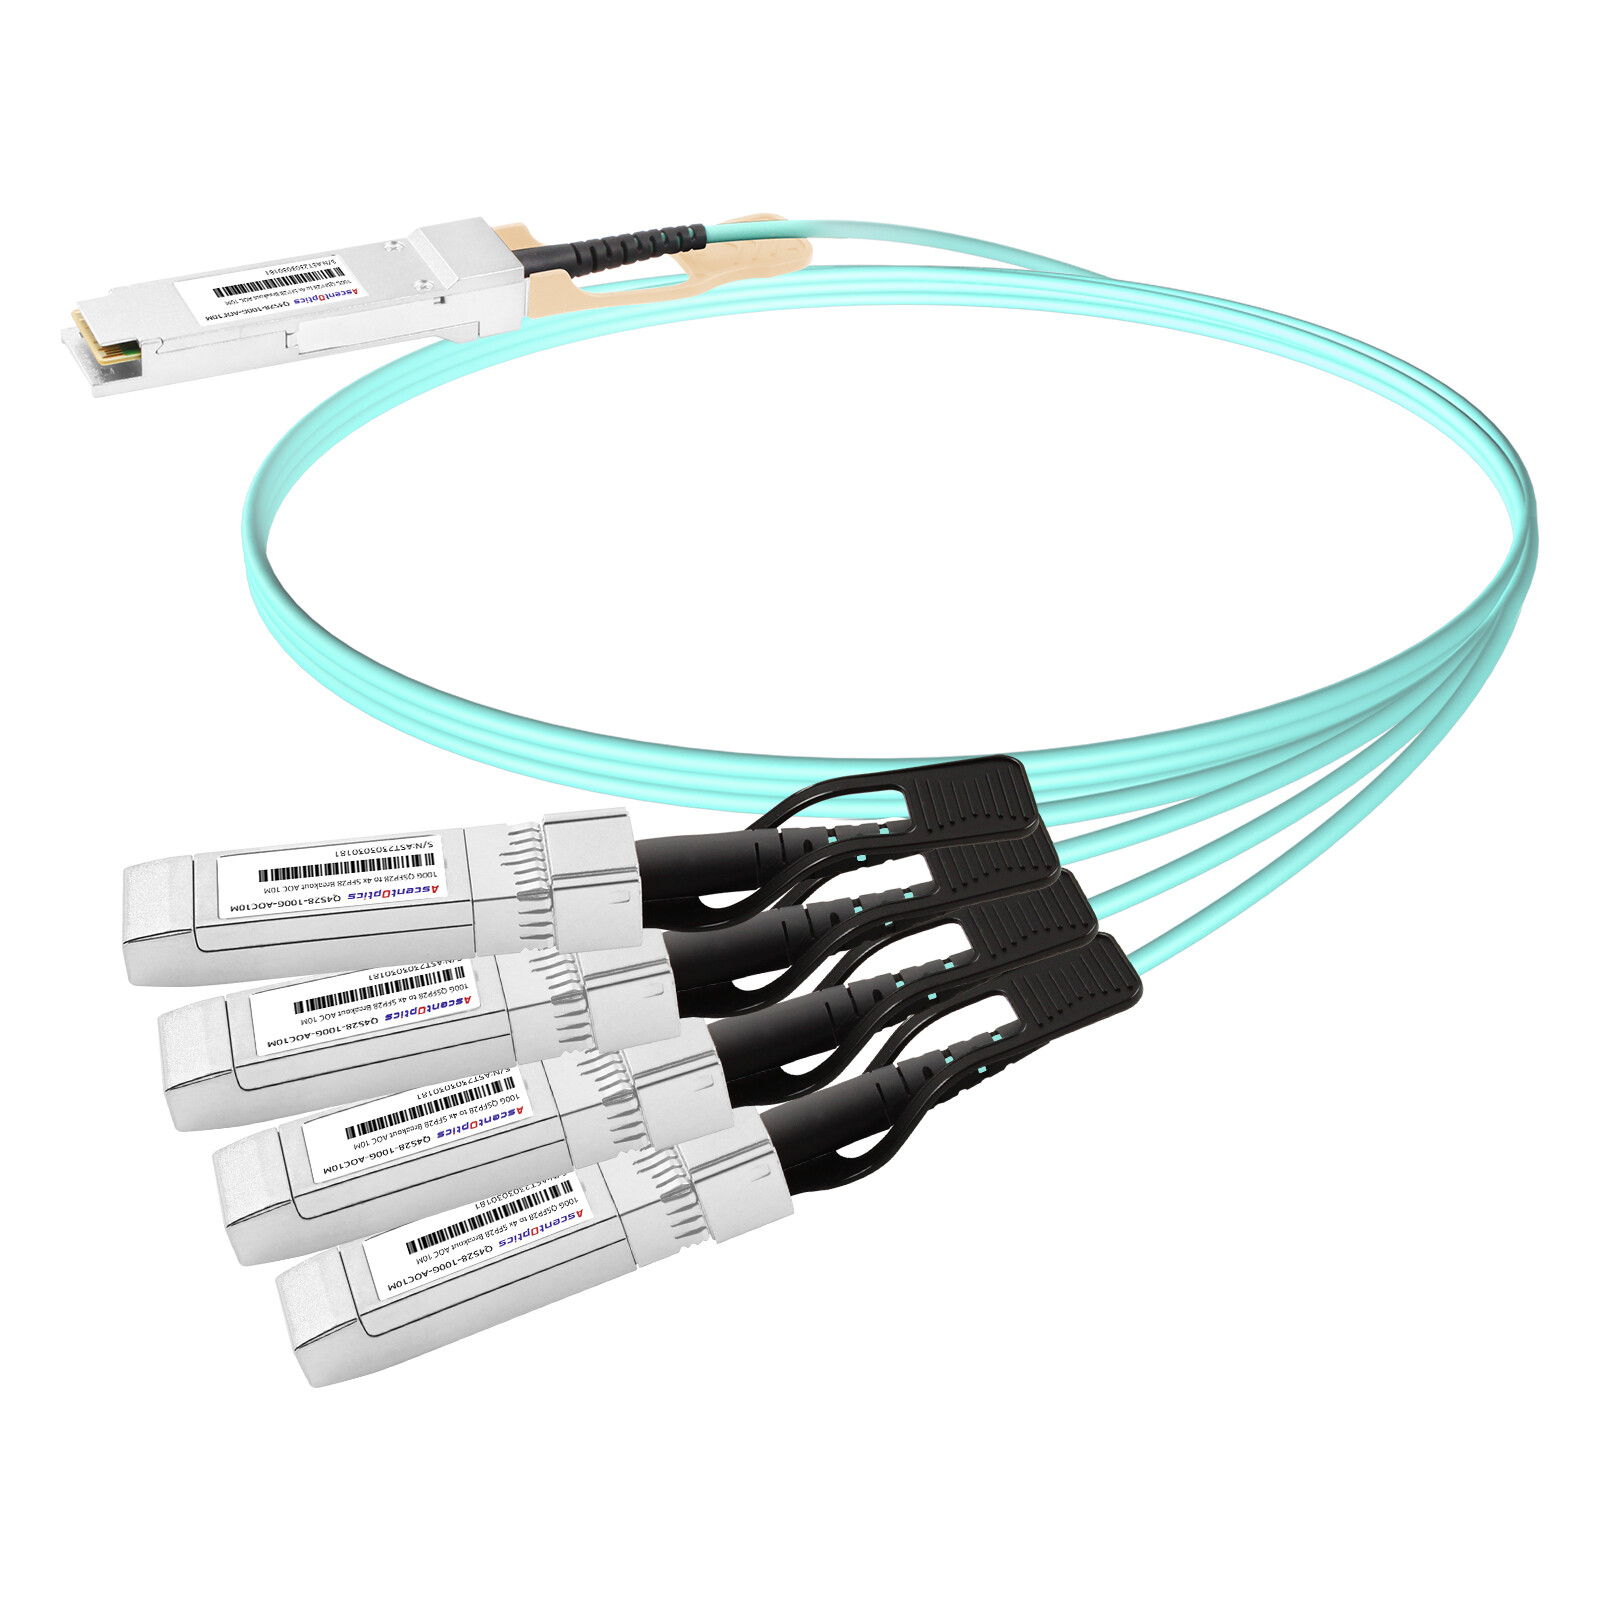 100G QSFP28 to 4x 25G SFP28 Breakout AOC Cable,10 Meters